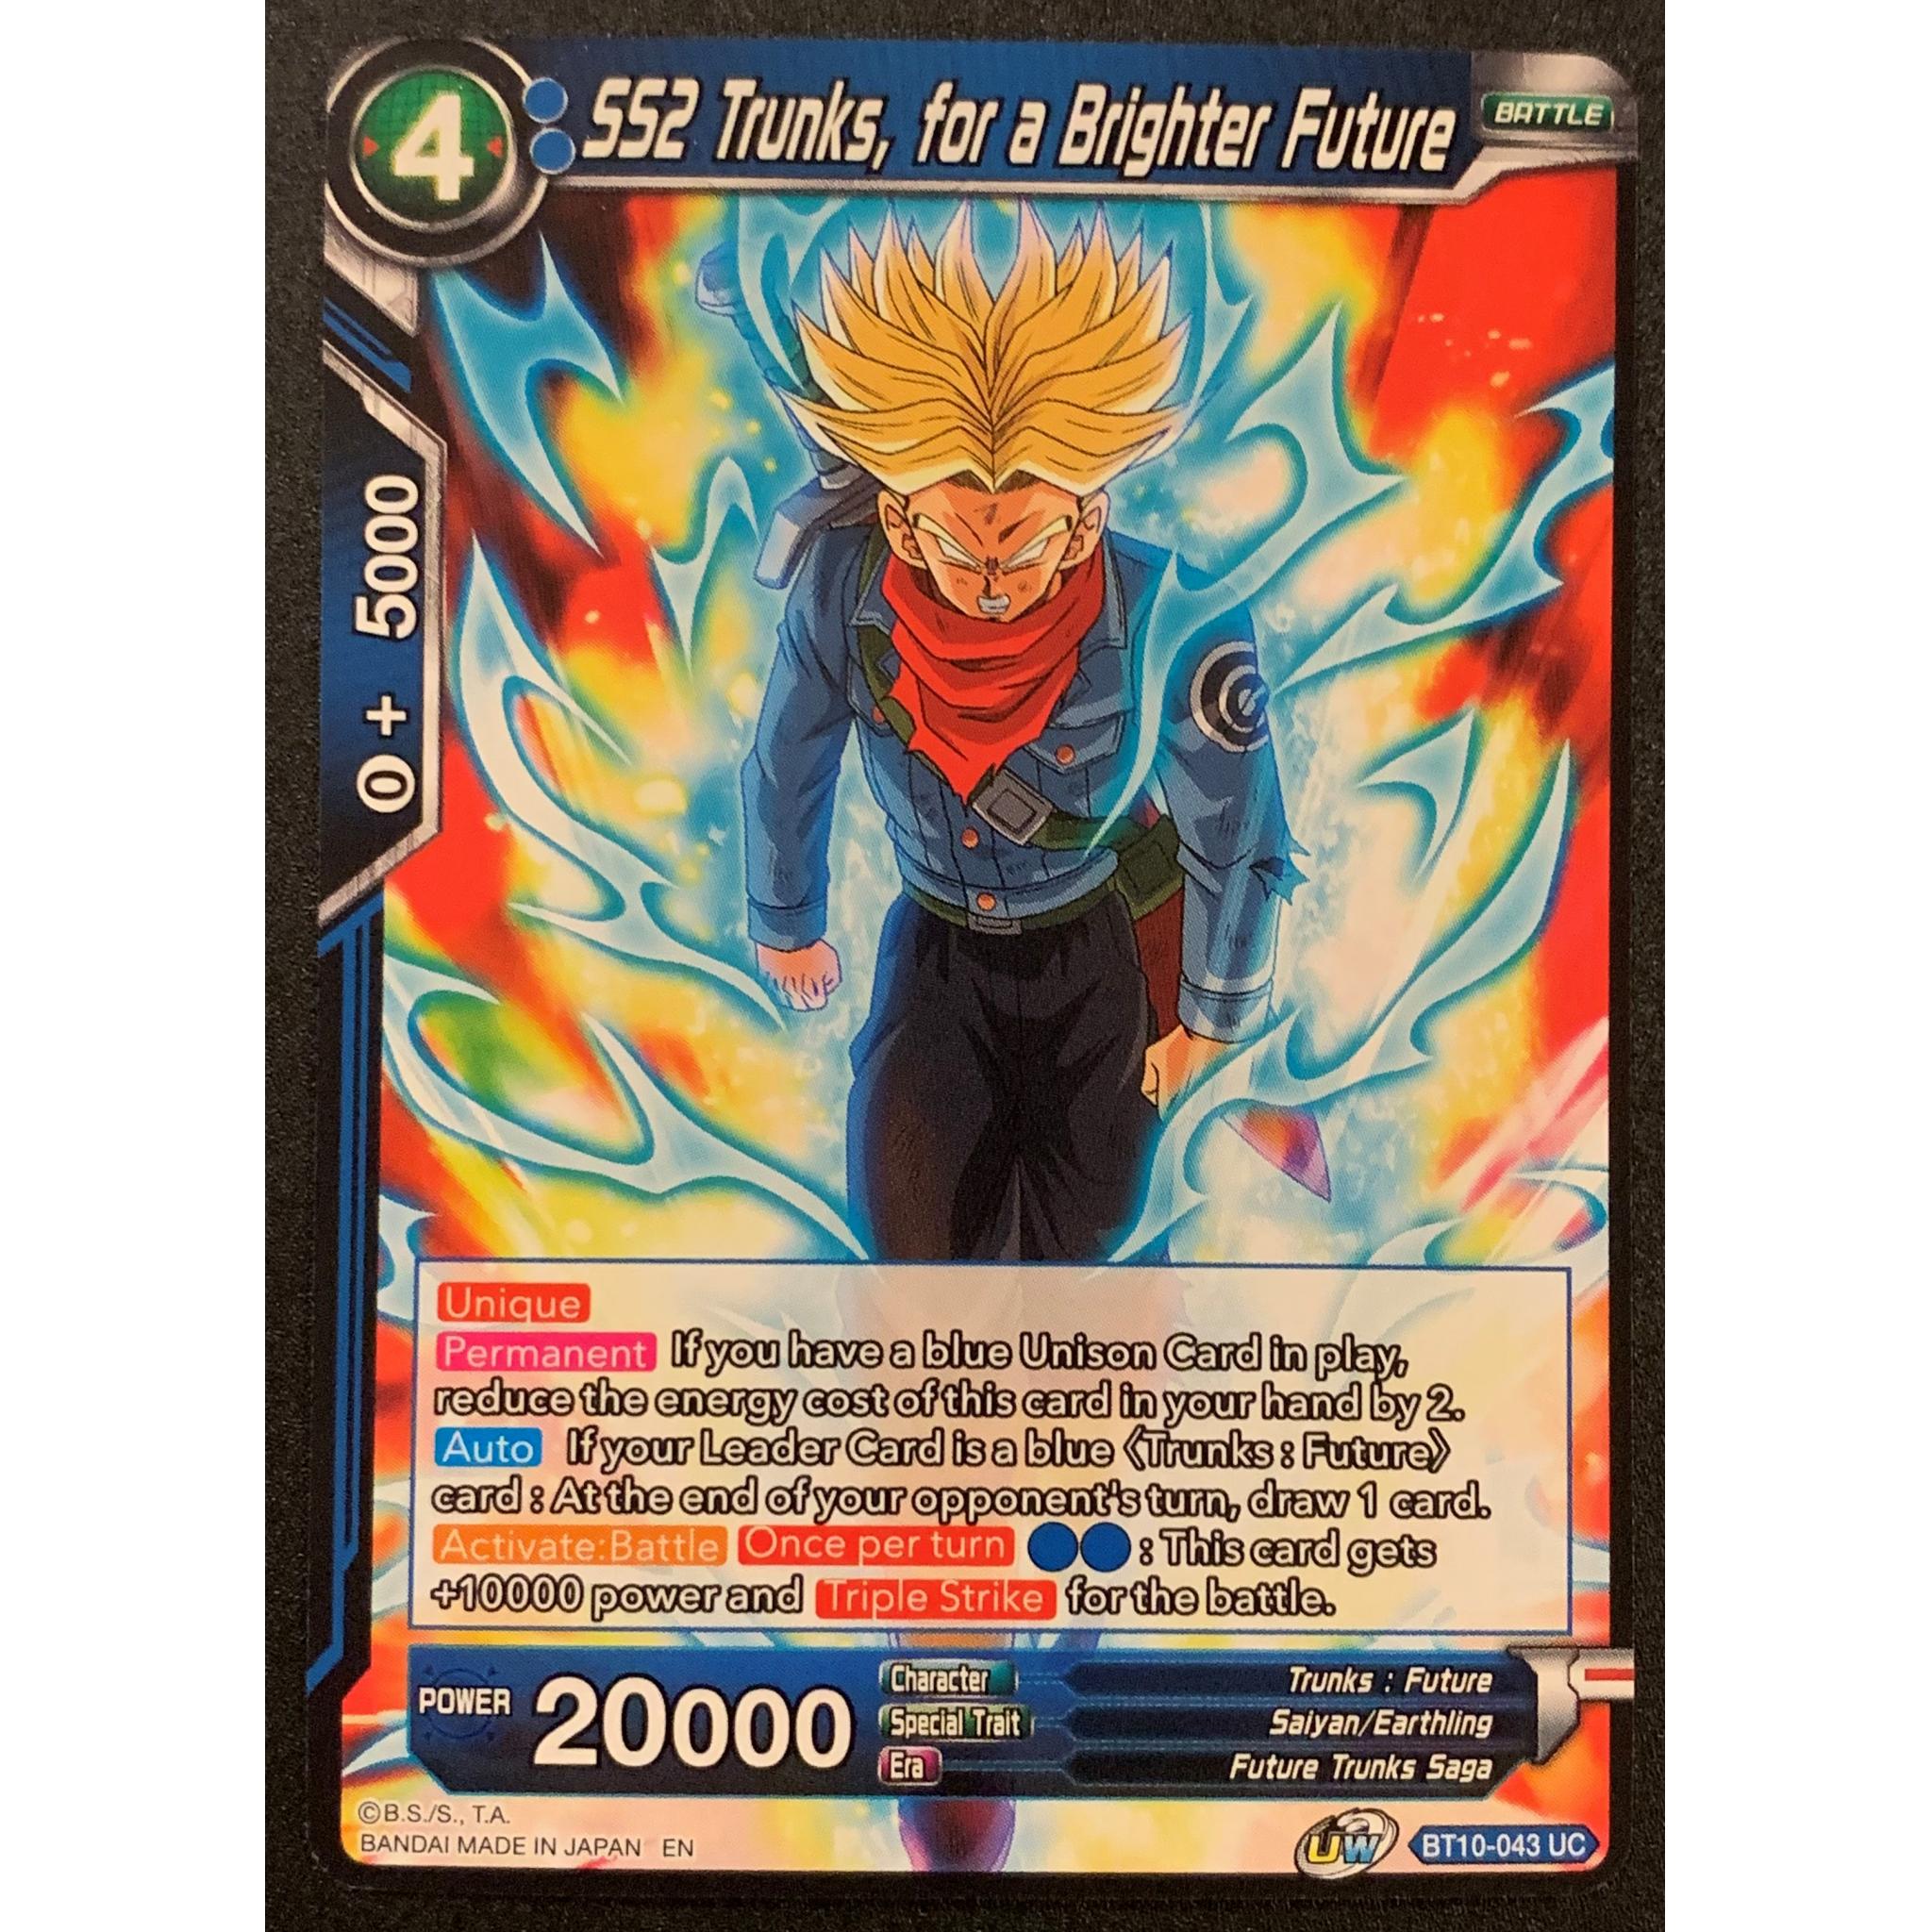 SS2 Trunks, for a Brighter Future | BT10-043 UC